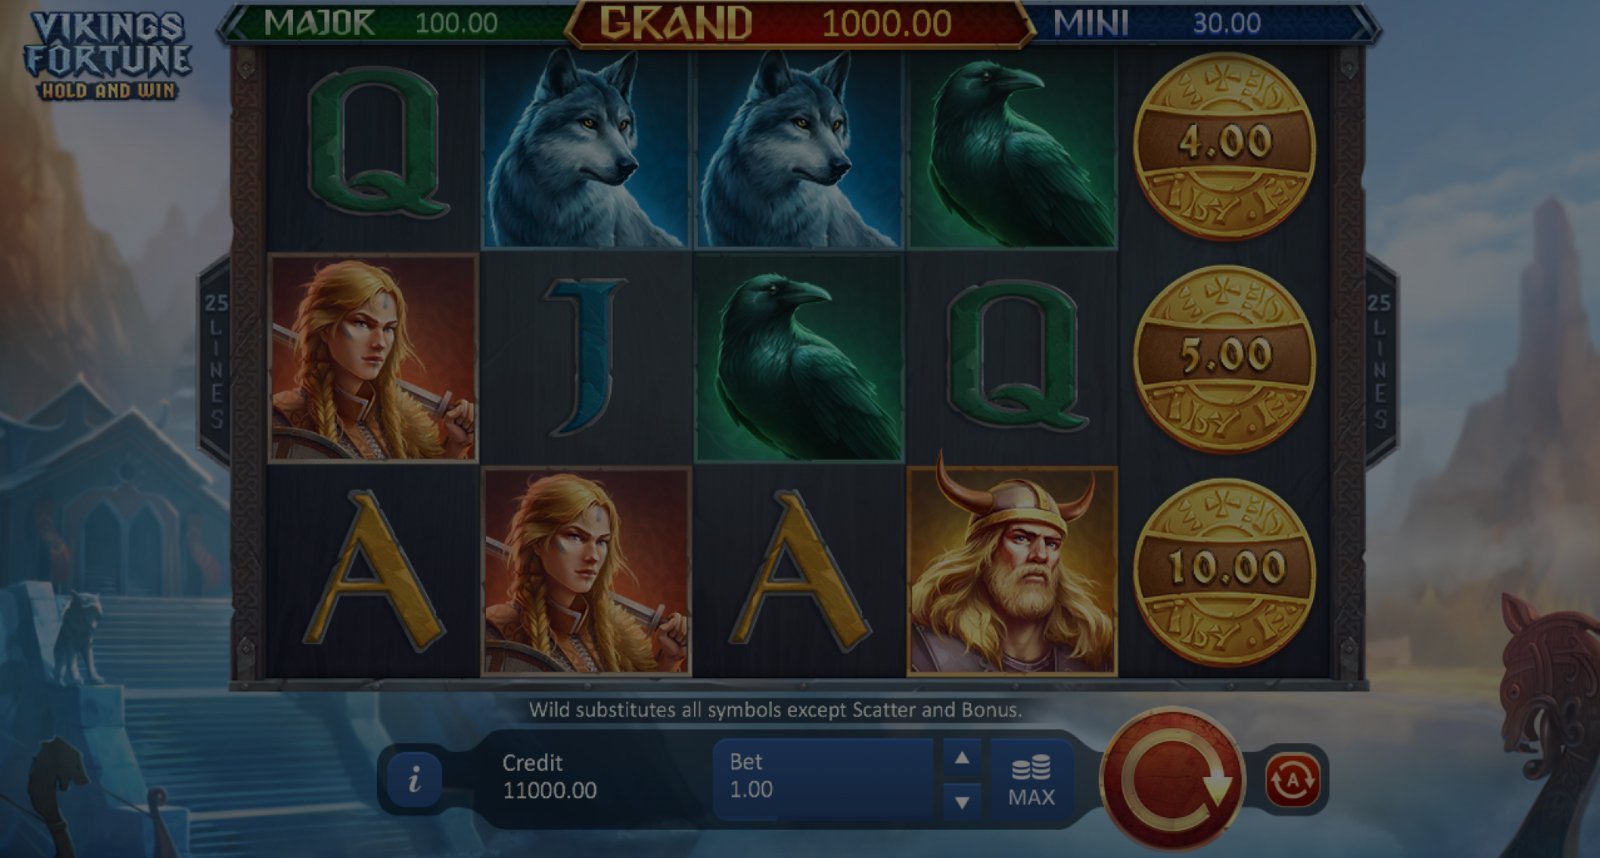 Vikings Fortune Hold and Win demo